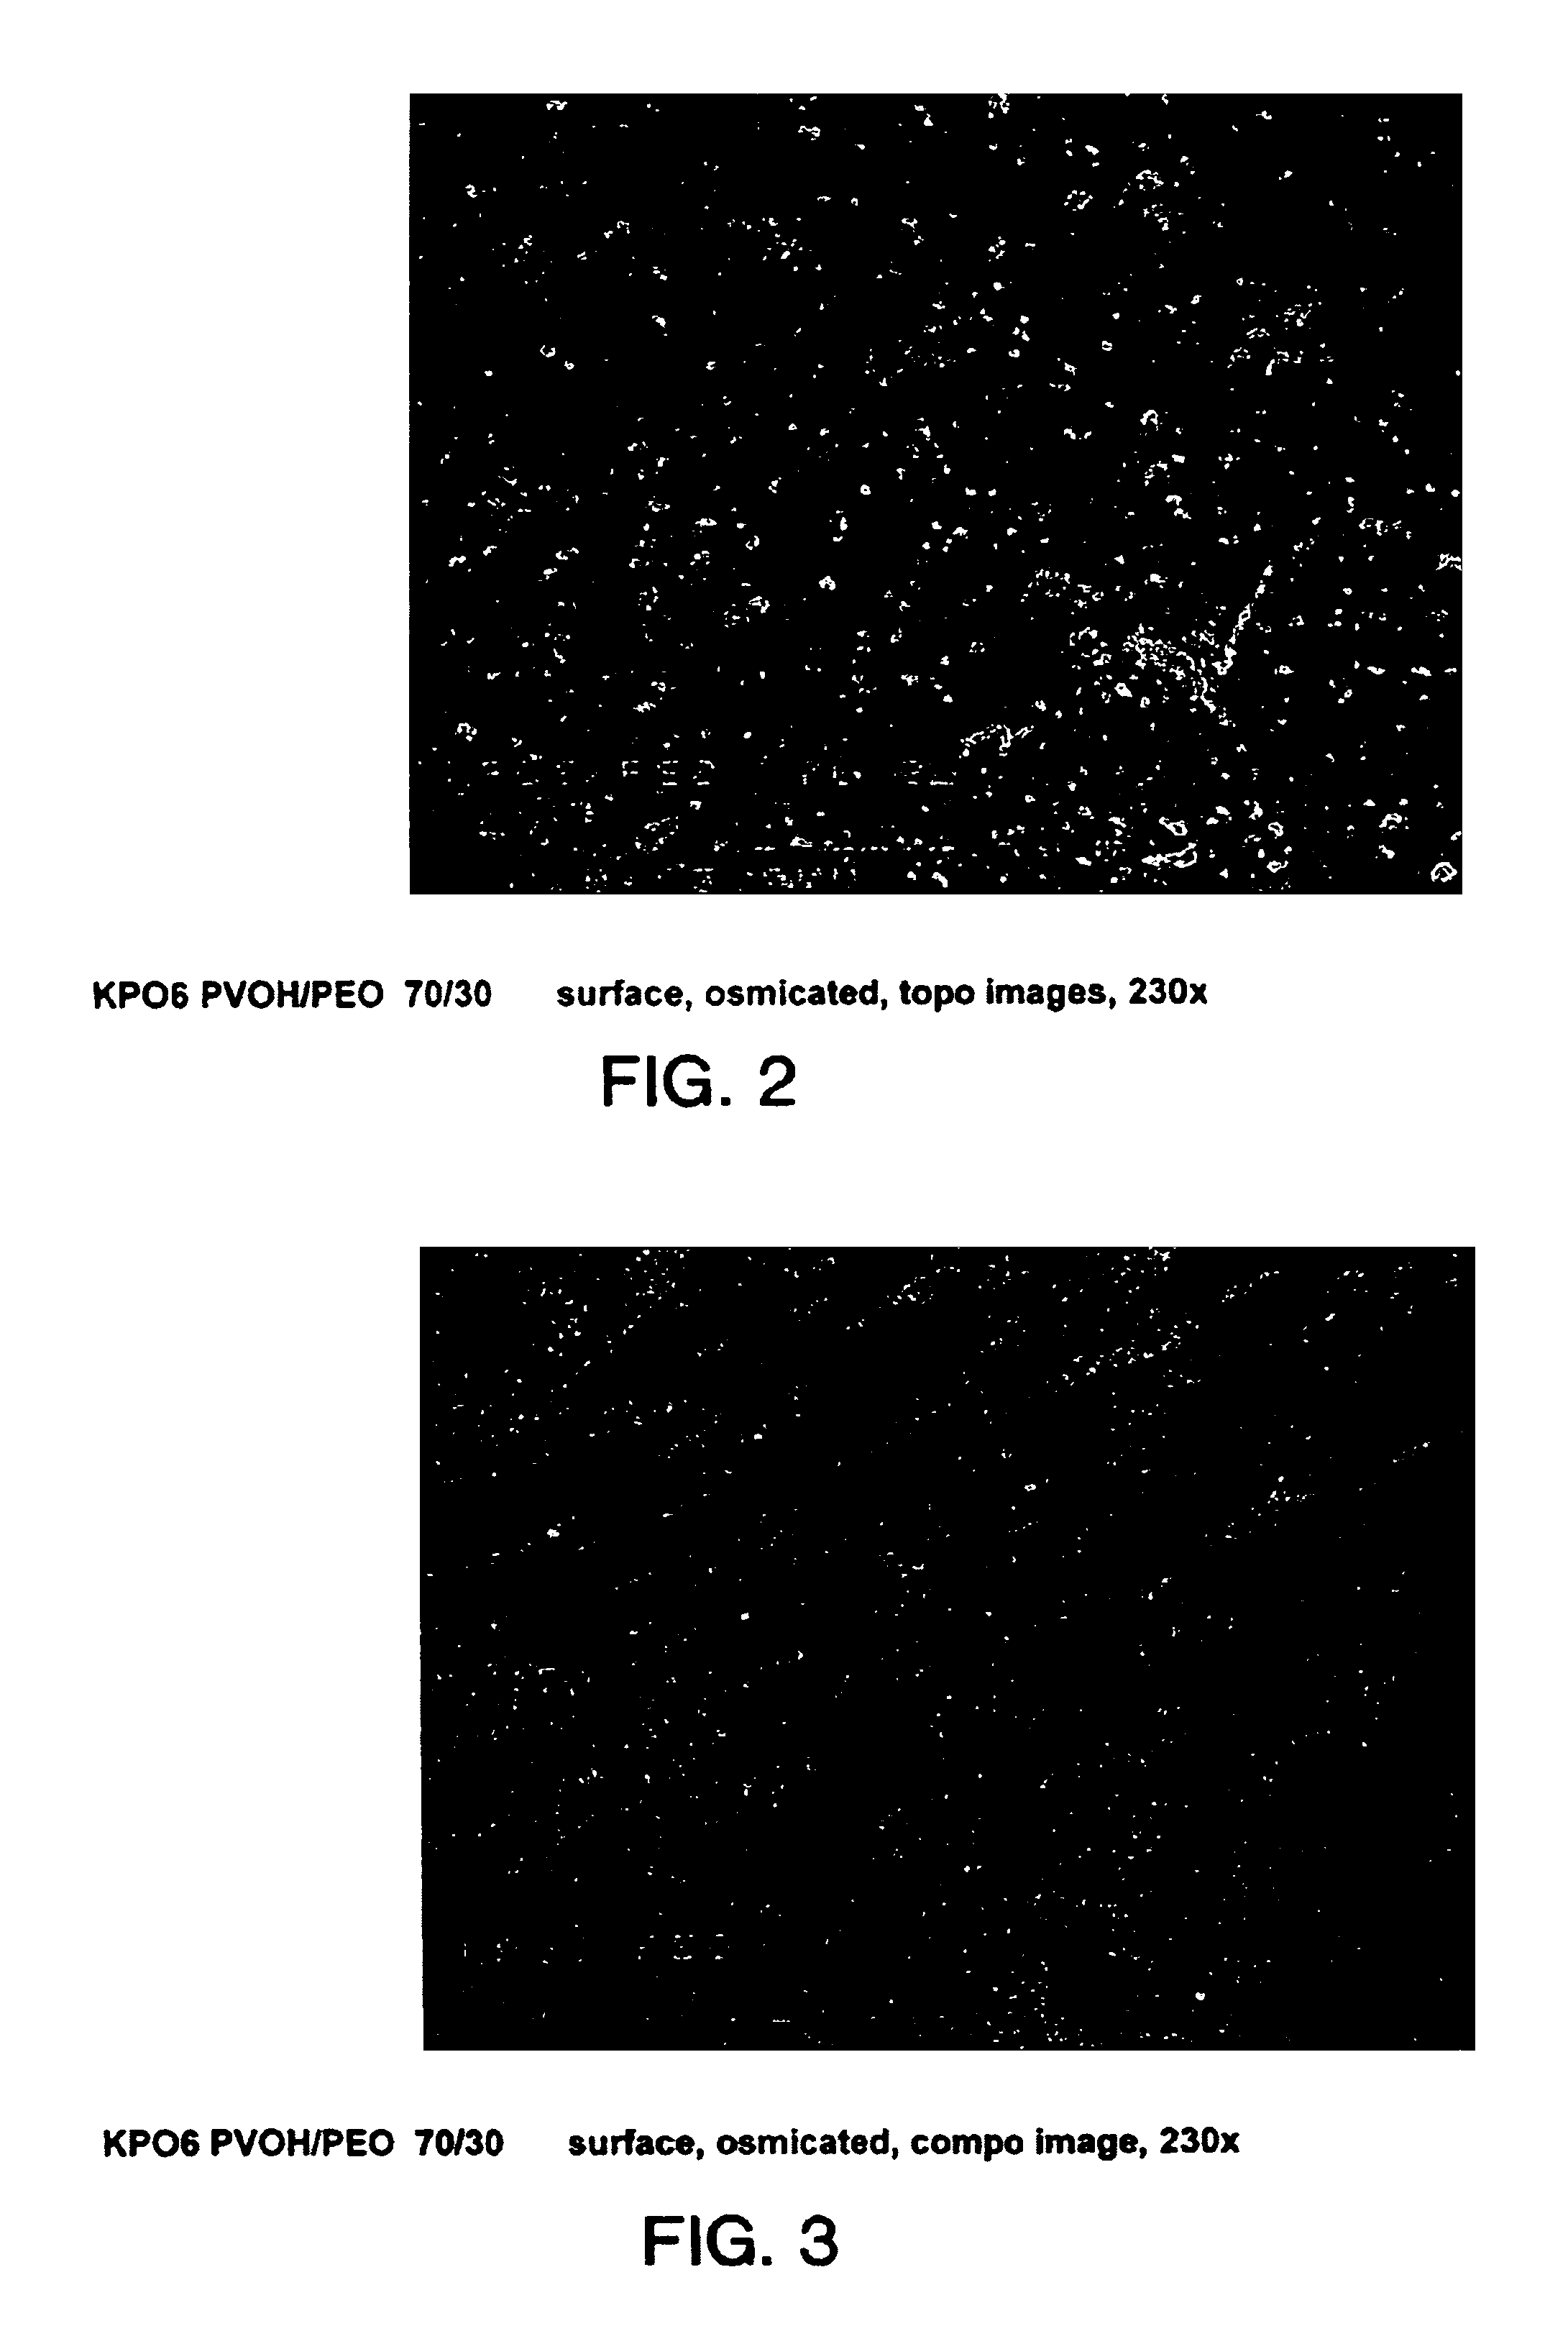 Method of making blends of poly(vinyl alcohol) and poly(ethylene oxide)